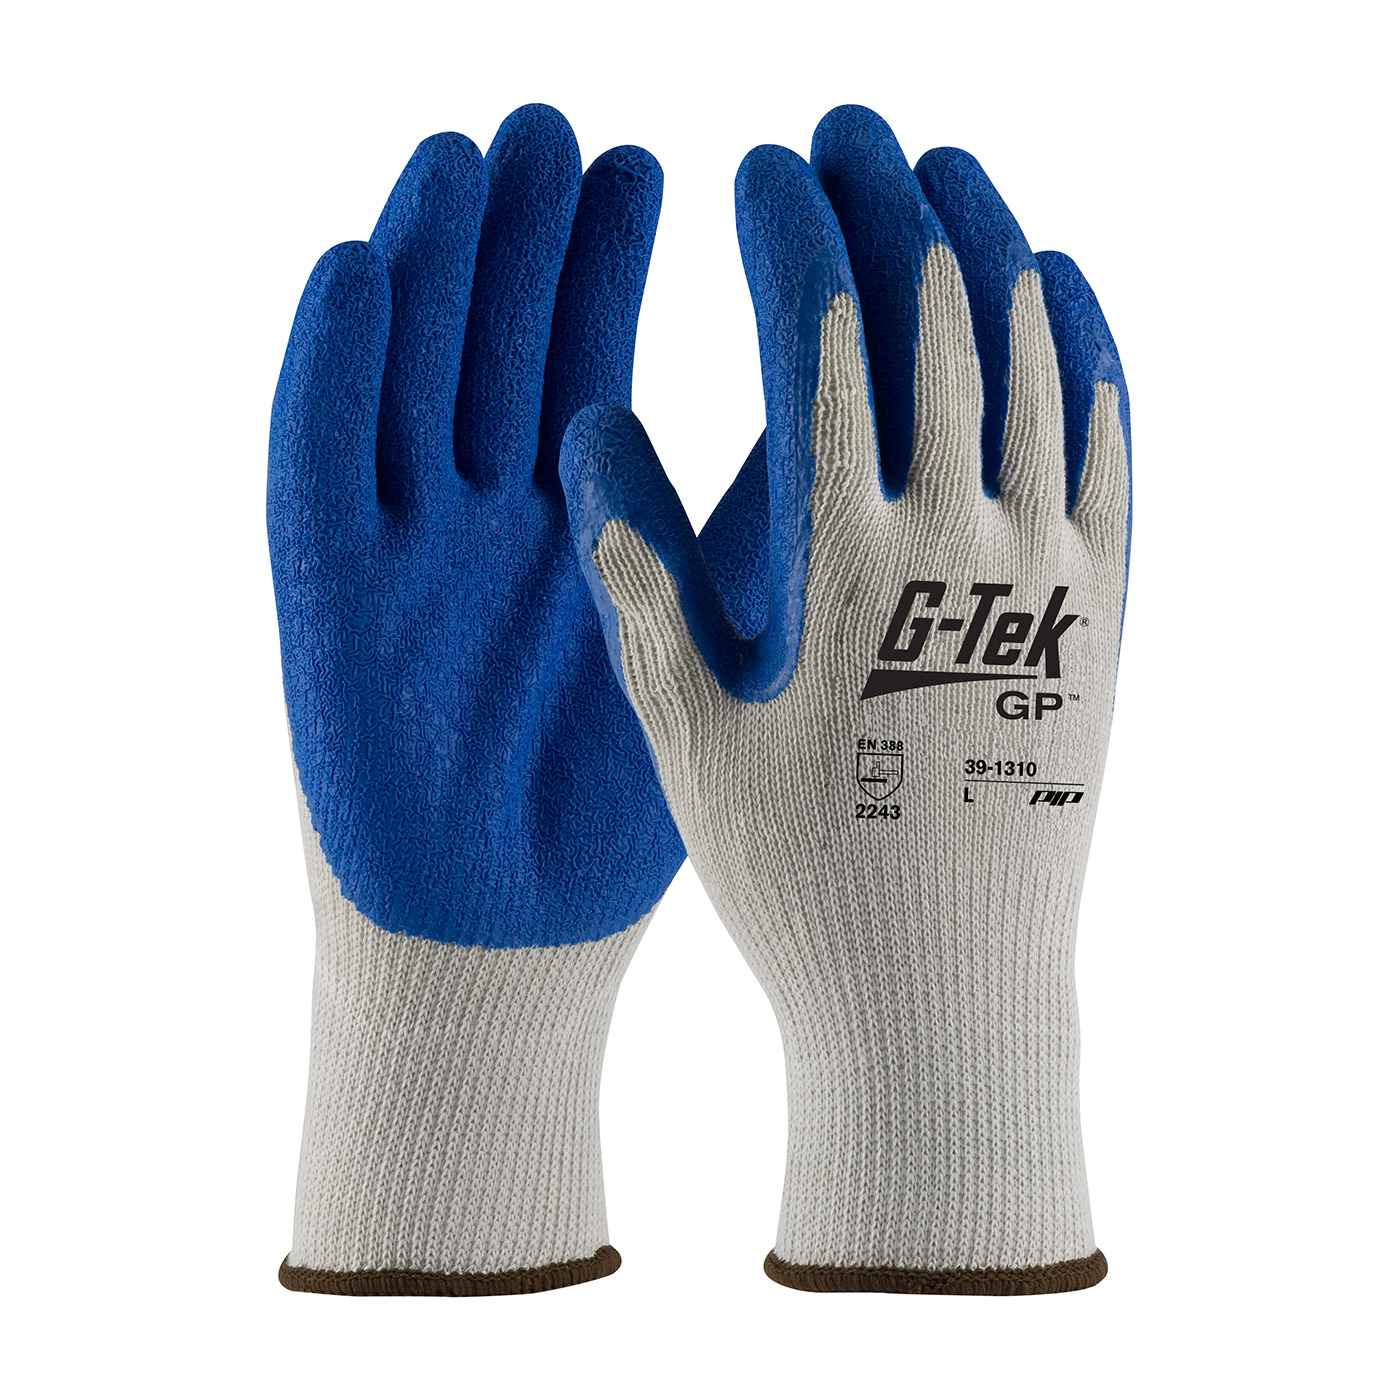 PIP 39-1310/M G-Tek GP Seamless Knit Cotton/Polyester Glove with Latex Coated Crinkle Grip on Palm & Fingers - Economy Grade - Medium PID-39 1310 M